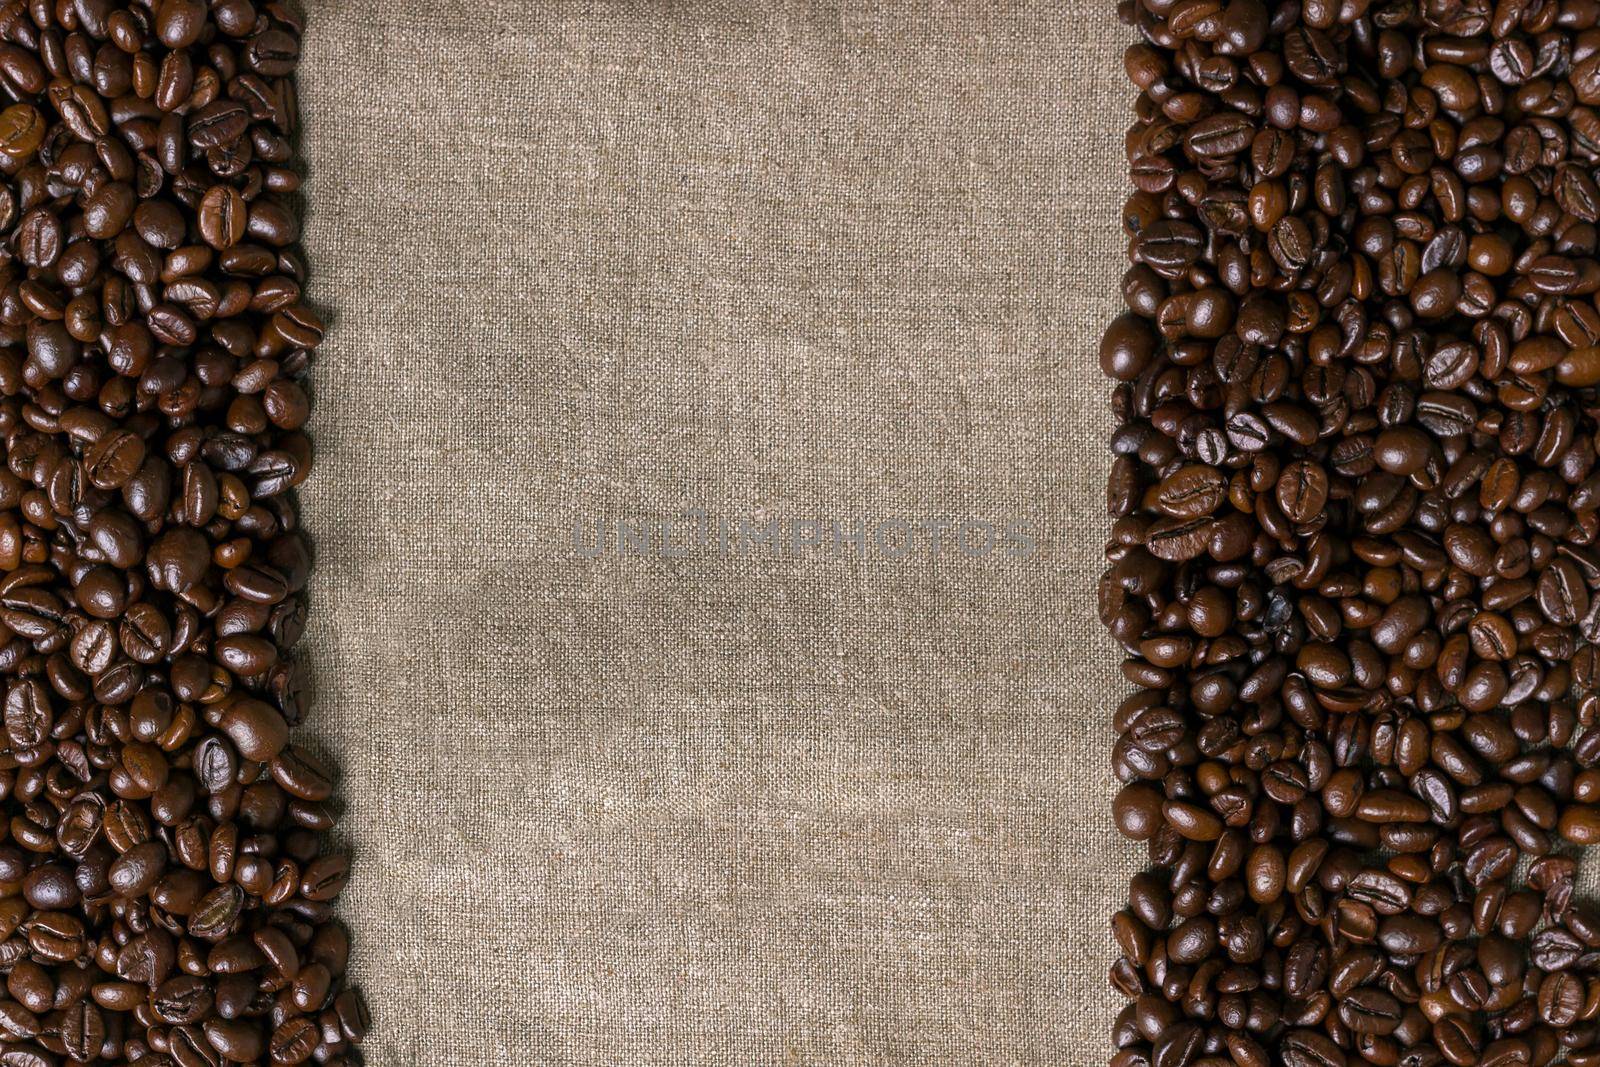 Coffee beans on burlap background. Top view. Copy space. Still life. Mock-up. Flat lay